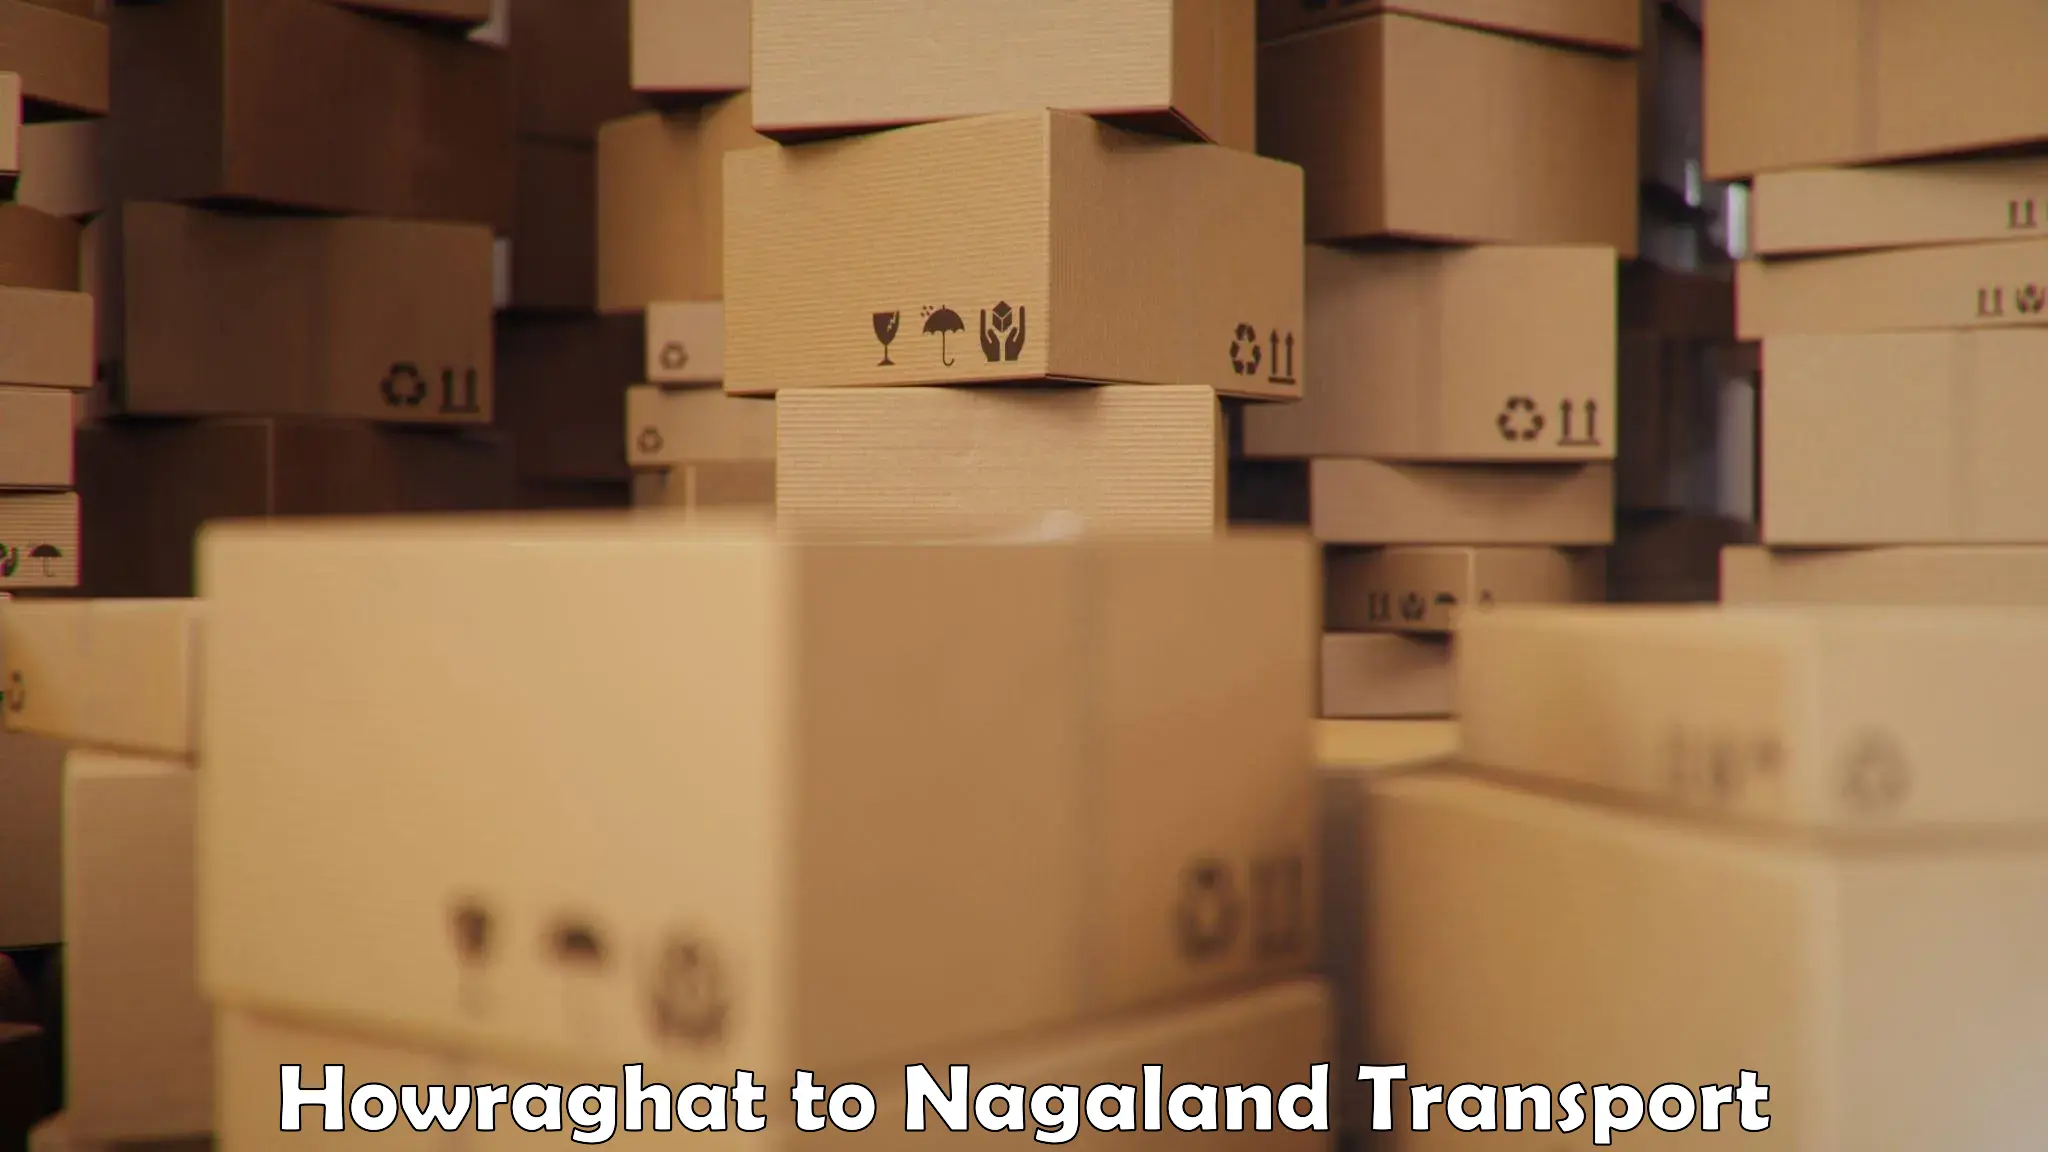 Shipping services Howraghat to Nagaland